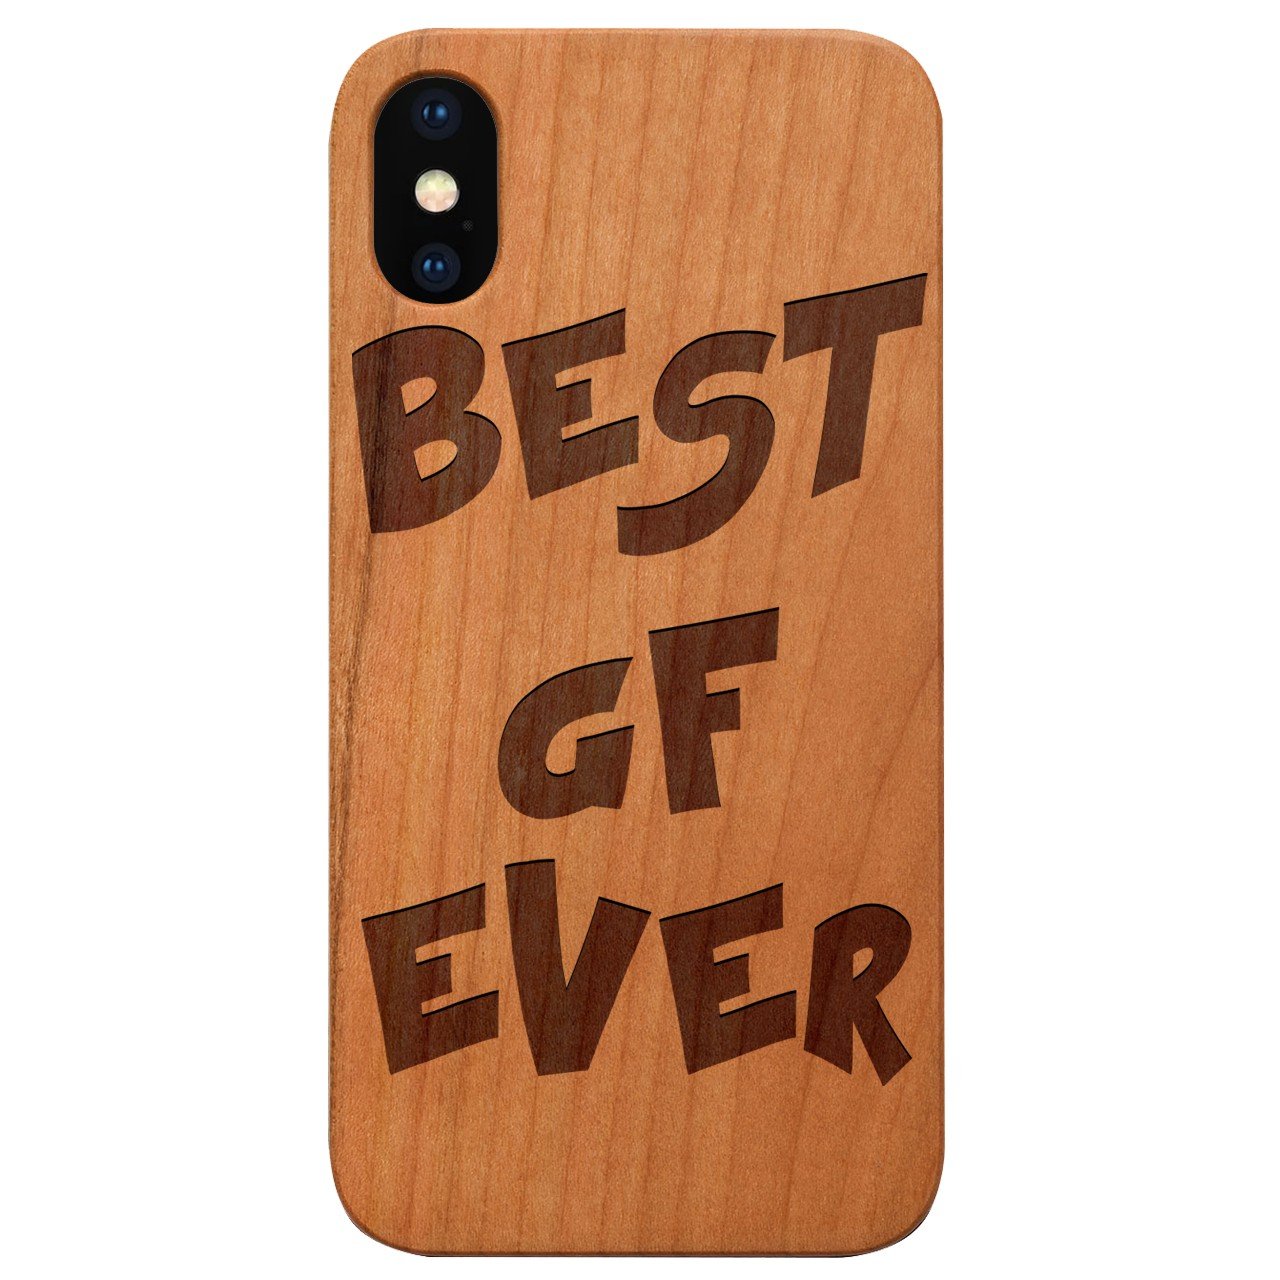 Best Gf Ever - Engraved - Wooden Phone Case